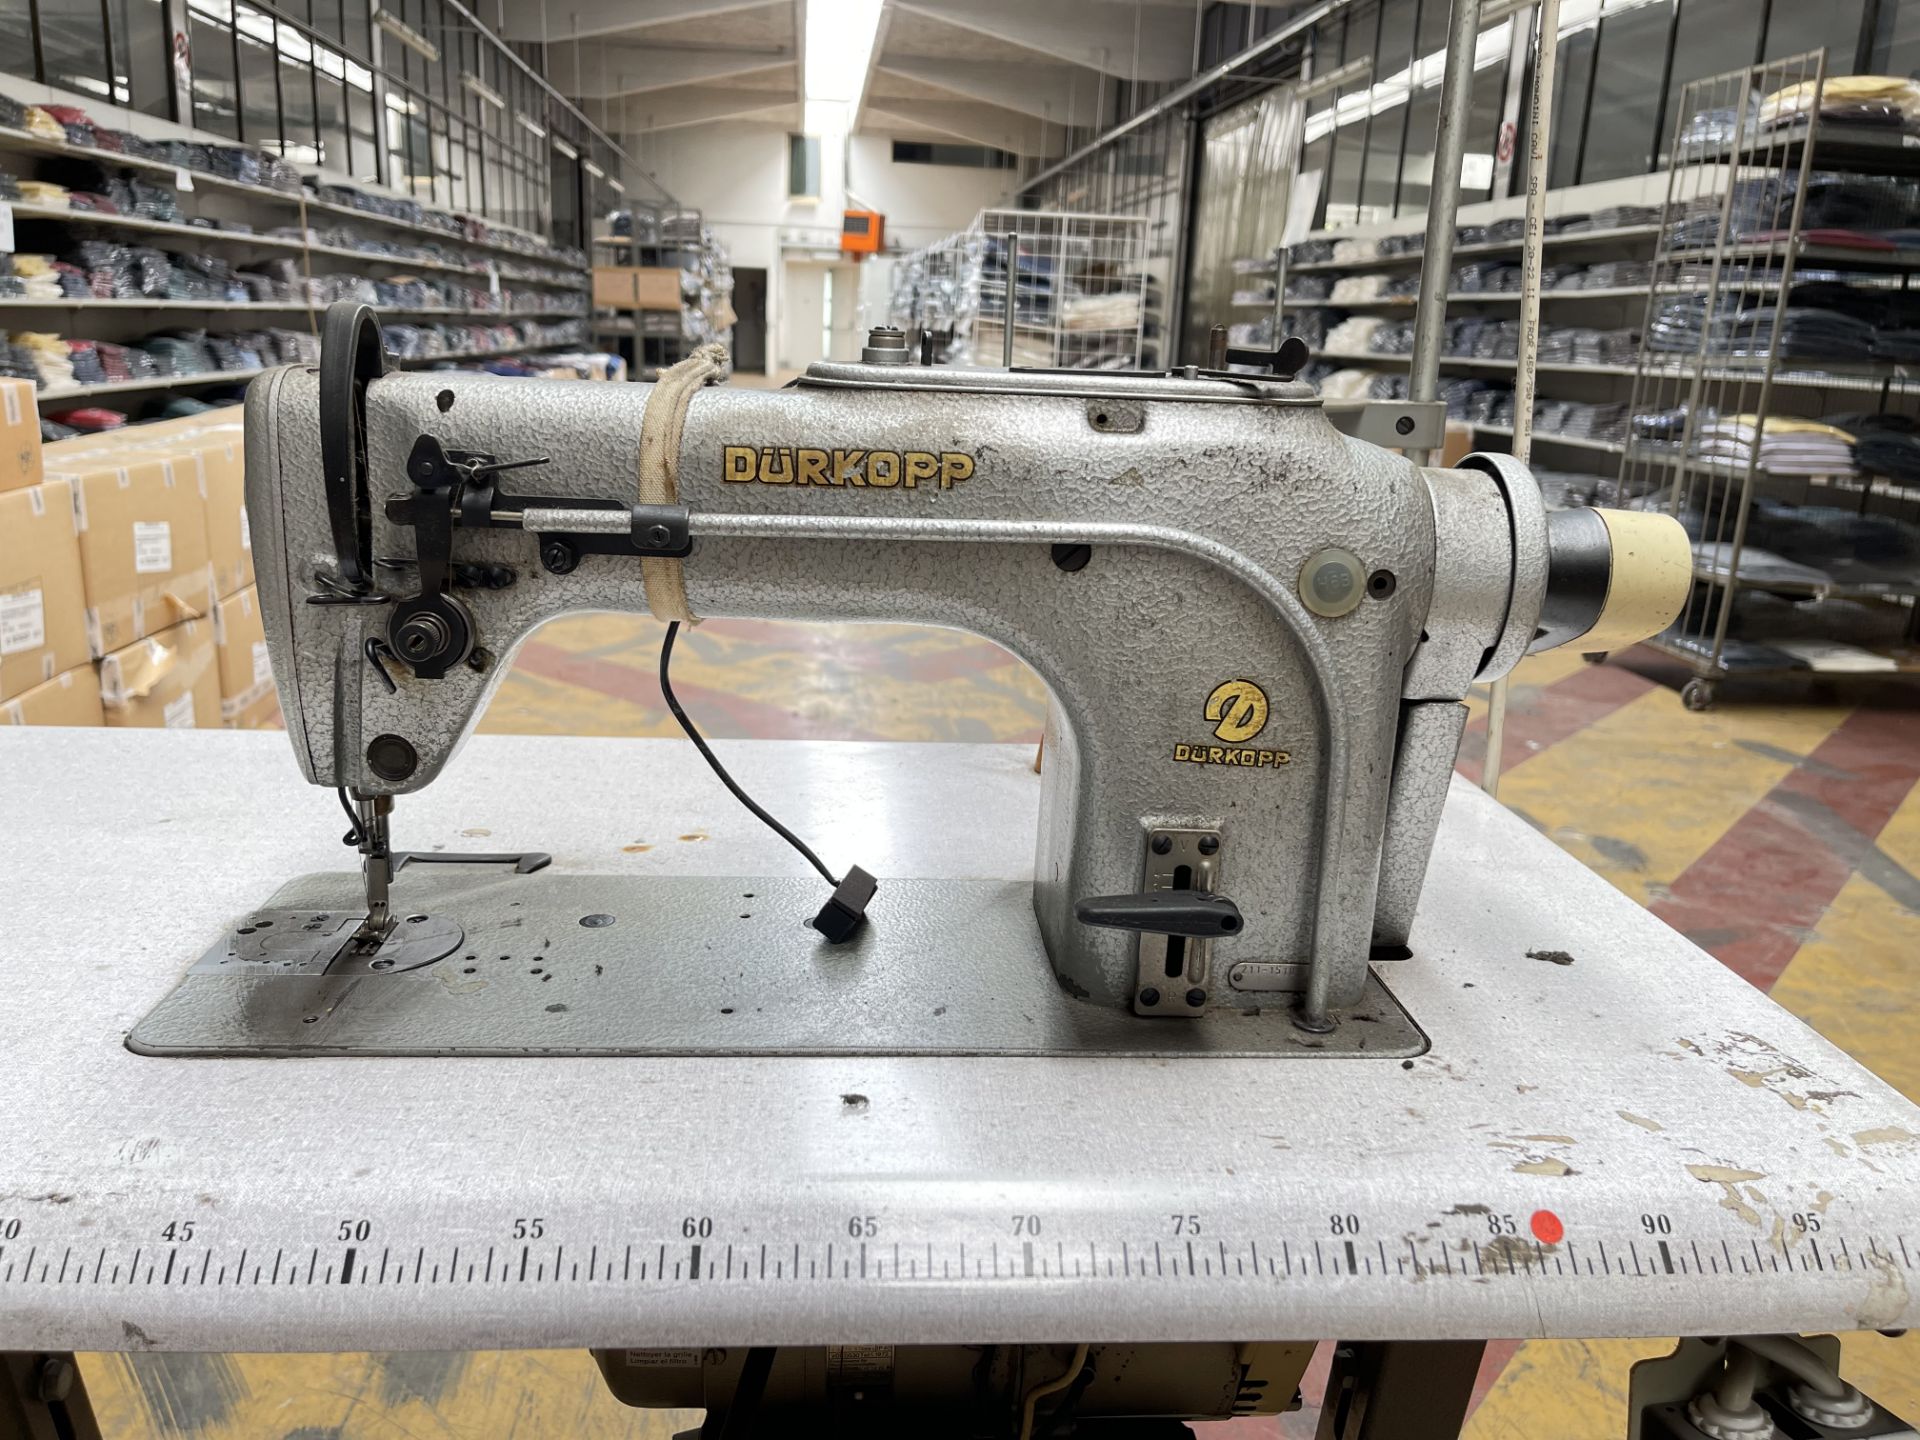 Durkopp Industrial Sewing machine. S/No 211-15105 - Image 3 of 8